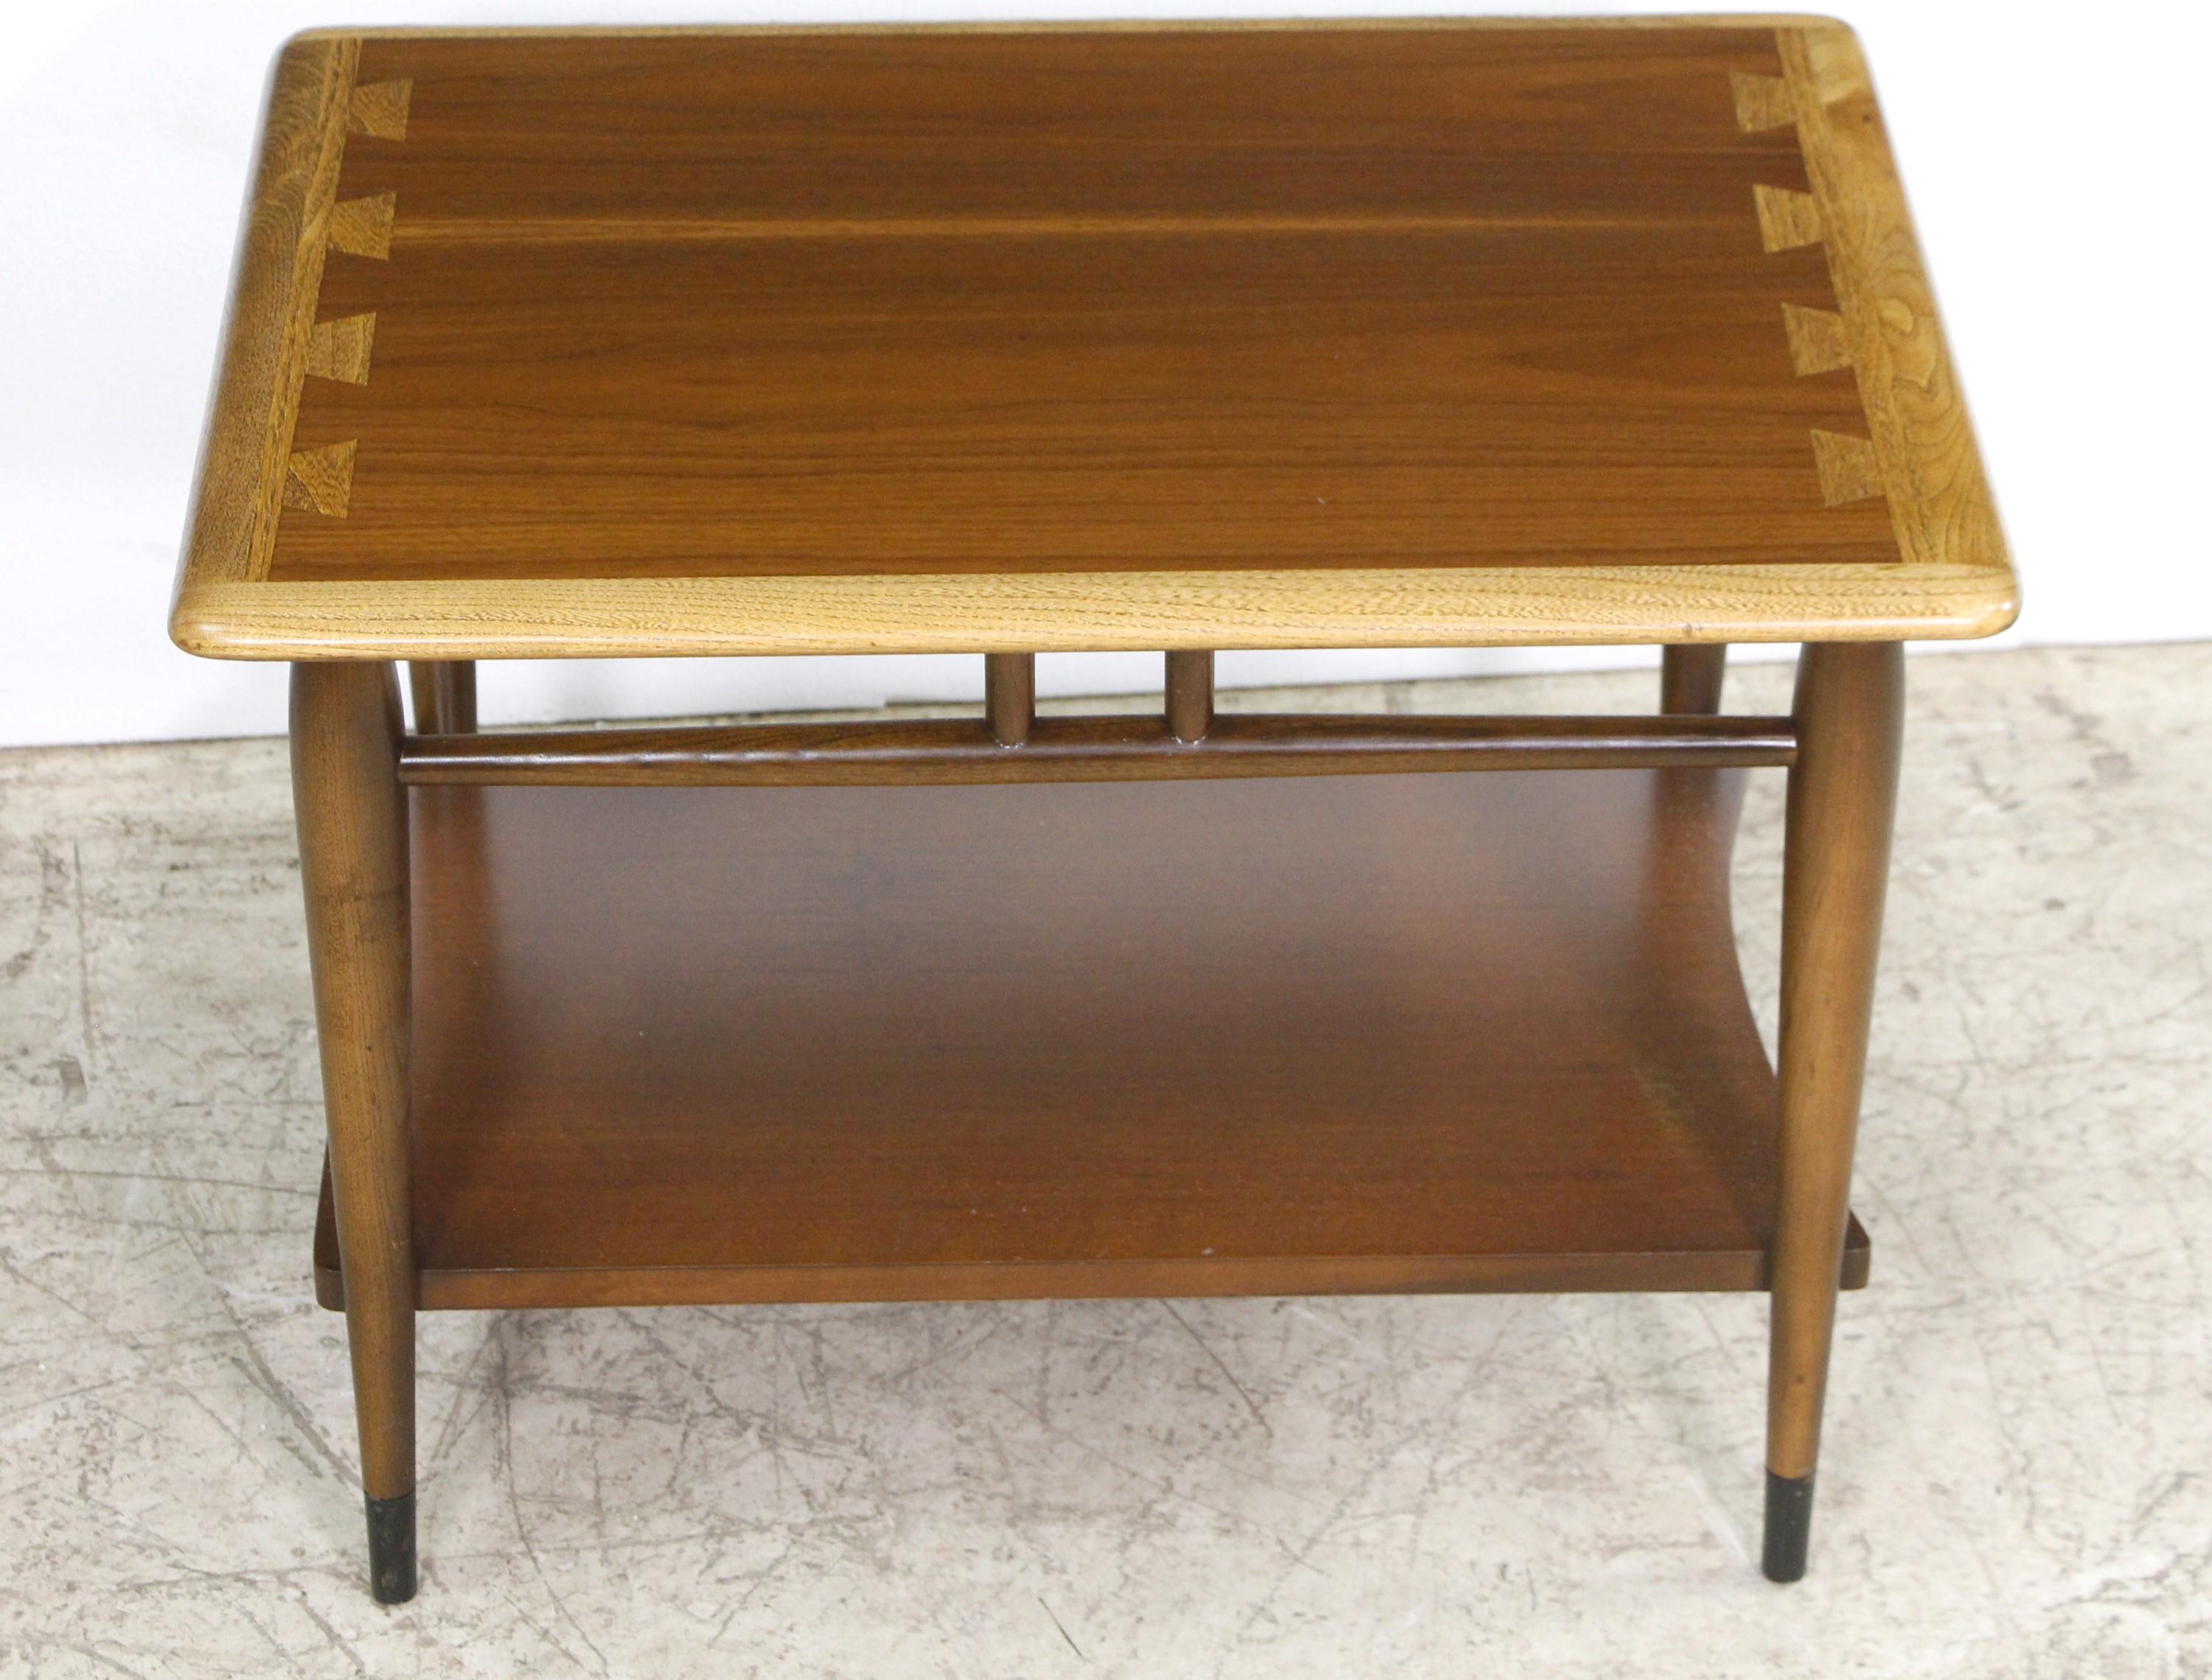 American Mid-Century Modern Walnut Side Table with Shelf by Lane Furniture